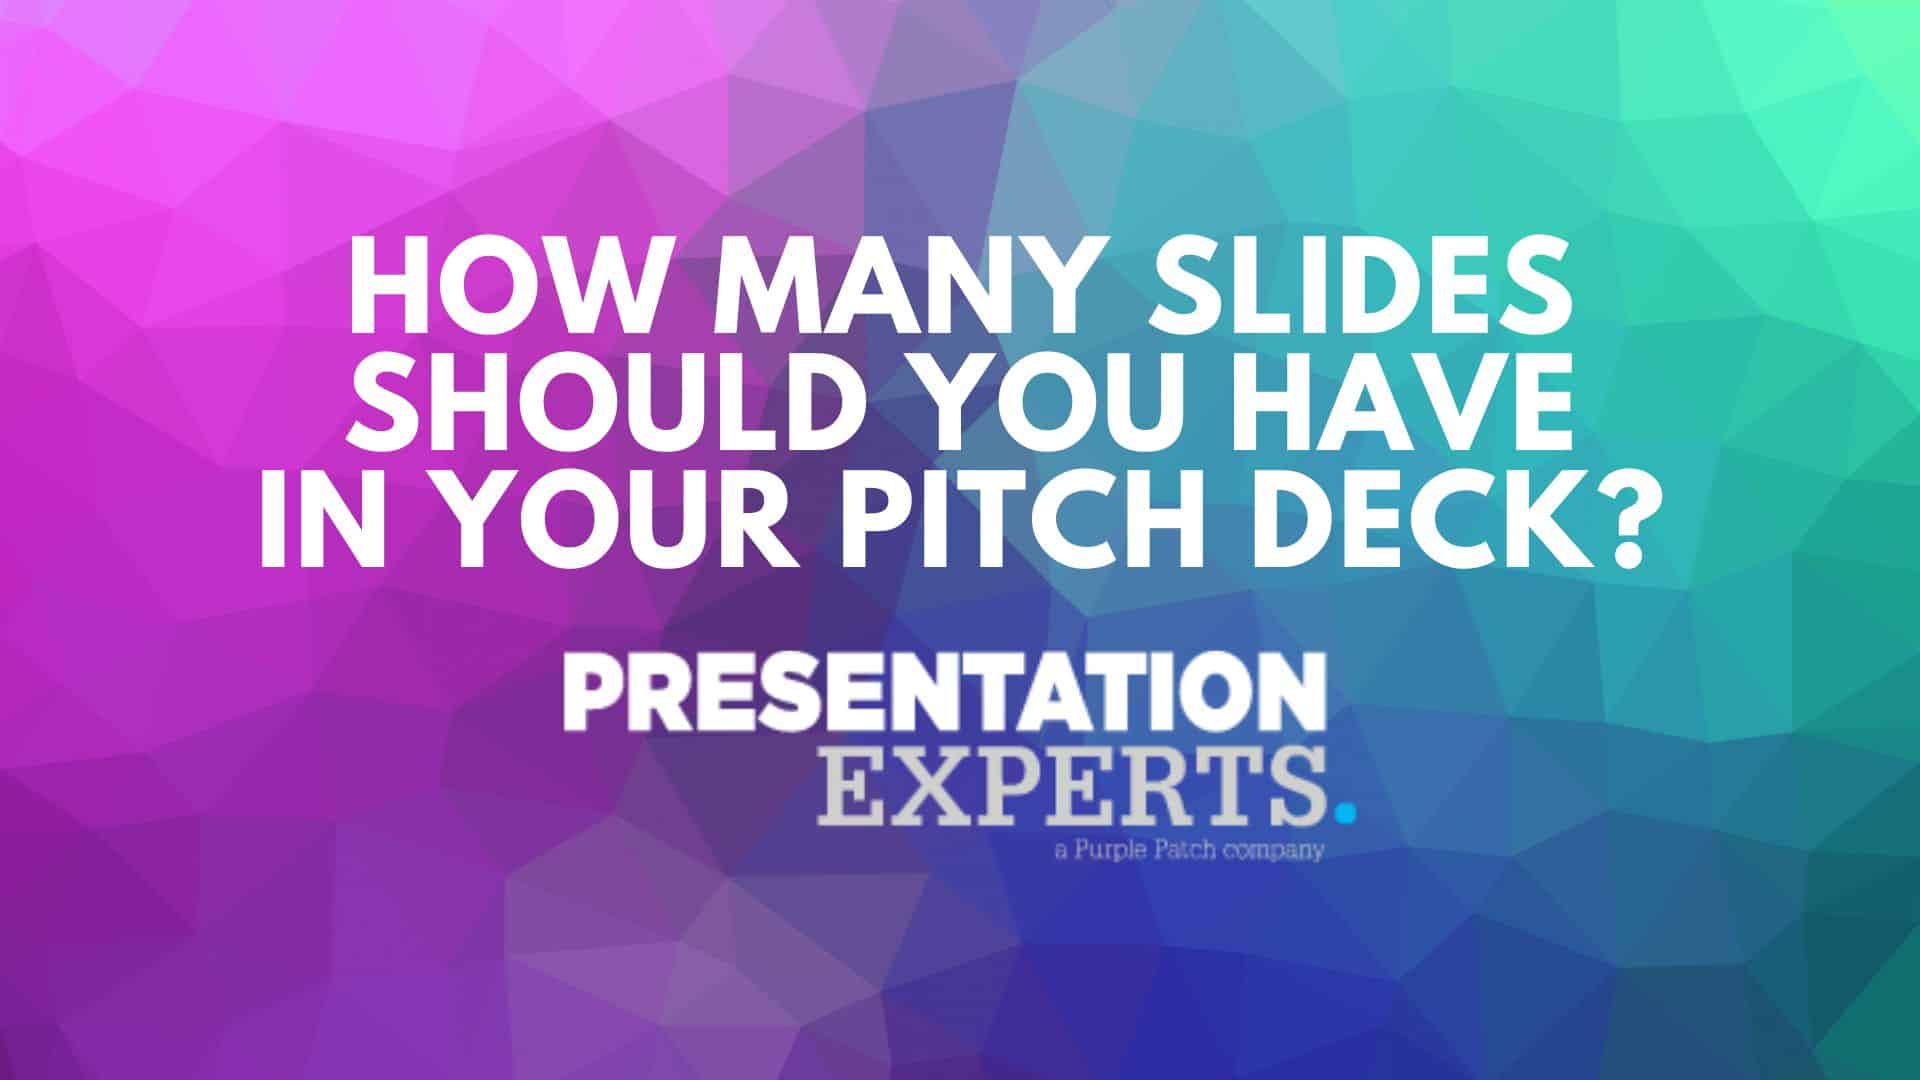 How Many Slides Should You Have in Your Pitch Deck?